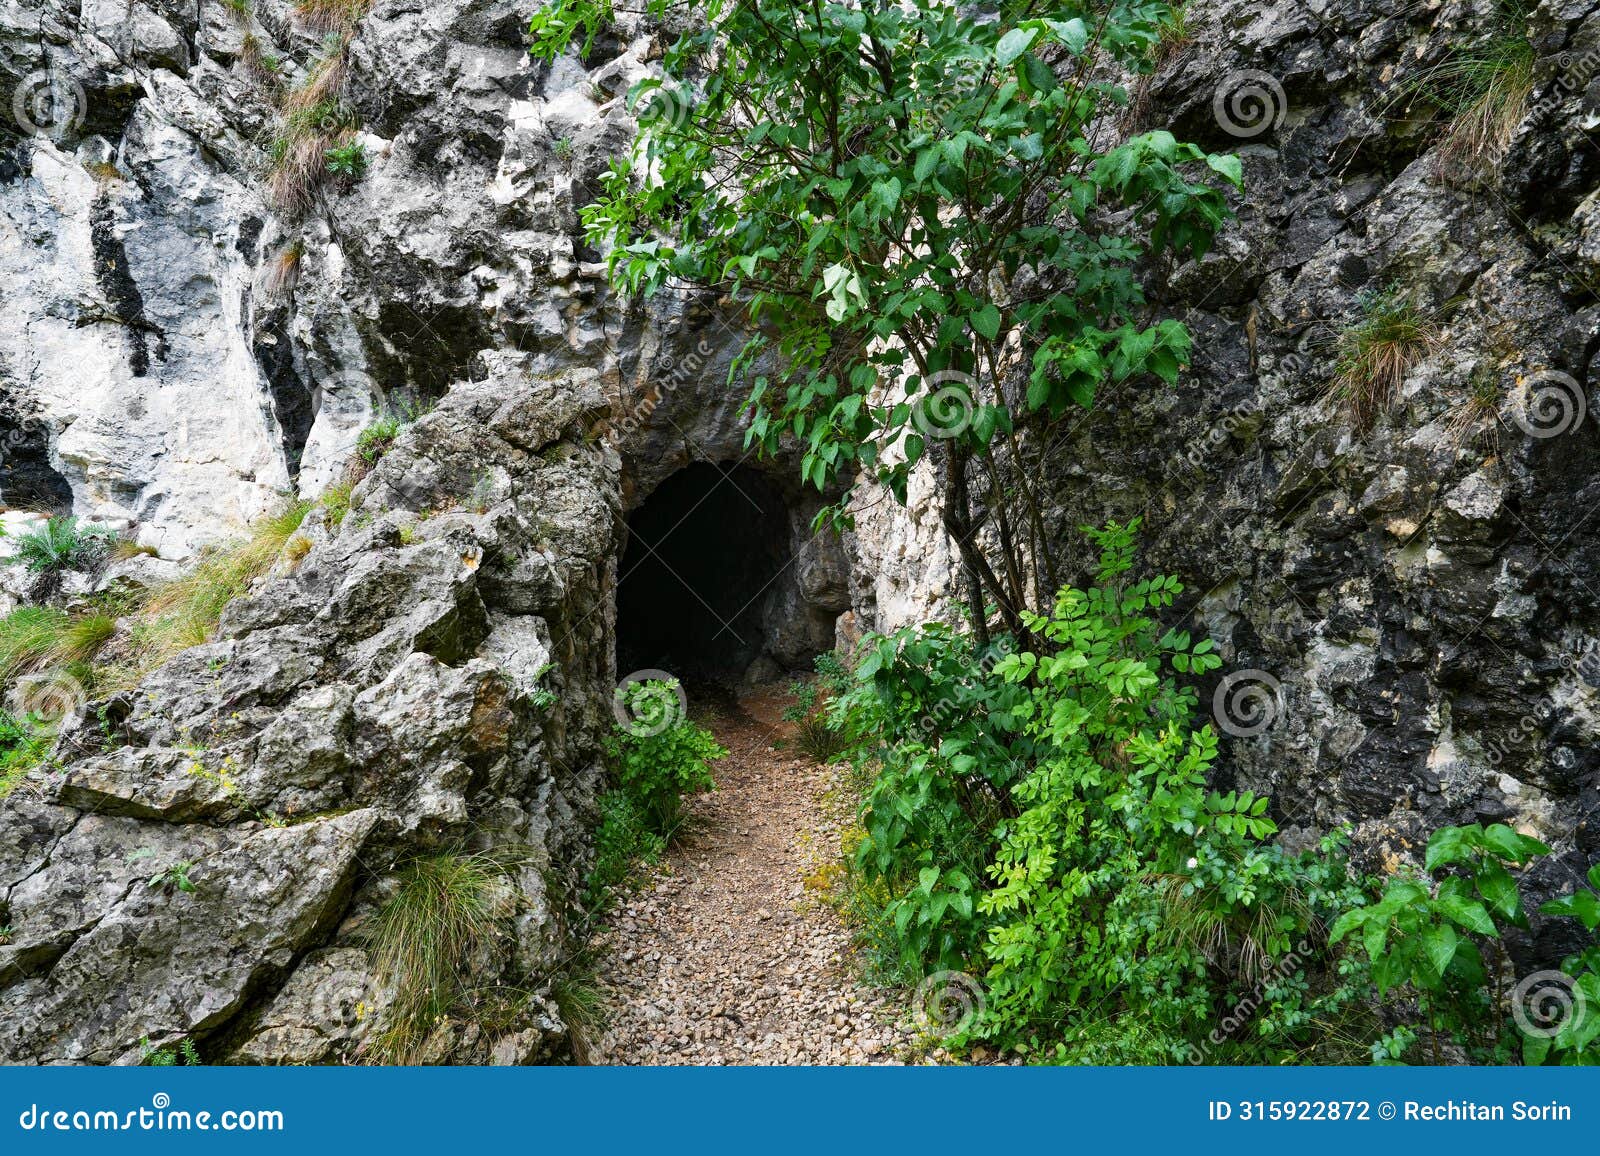 stone carved tunnel in nera gorges natural park, romania, europe